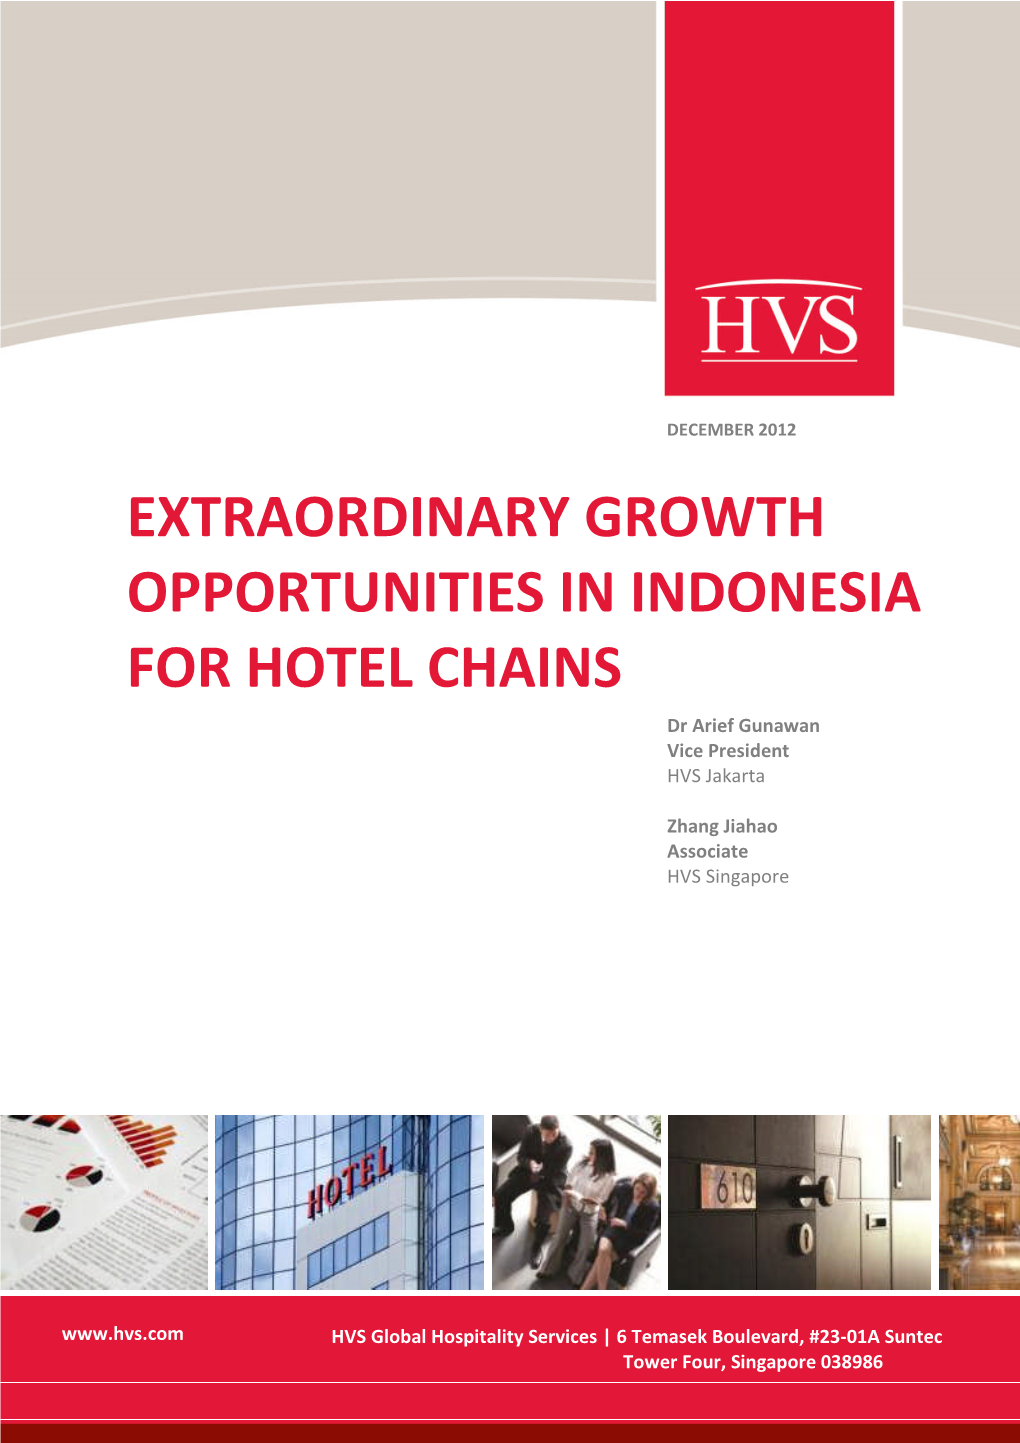 EXTRAORDINARY GROWTH OPPORTUNITIES in INDONESIA for HOTEL CHAINS Dr Arief Gunawan Vice President HVS Jakarta